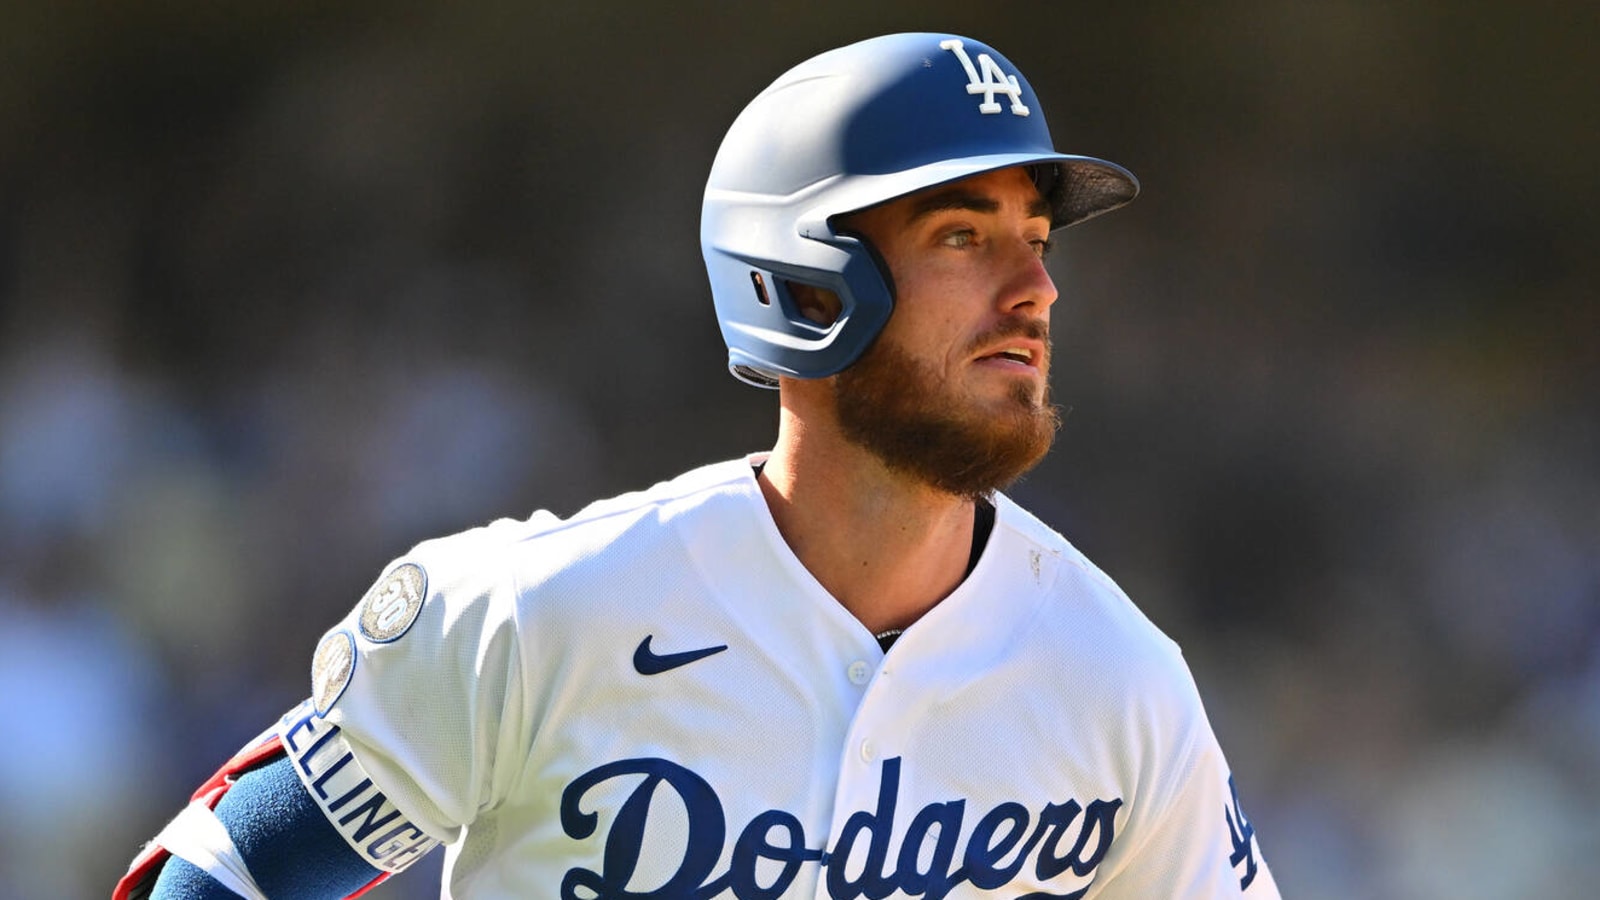 How Cody Bellinger's resurgent season affects his free agency